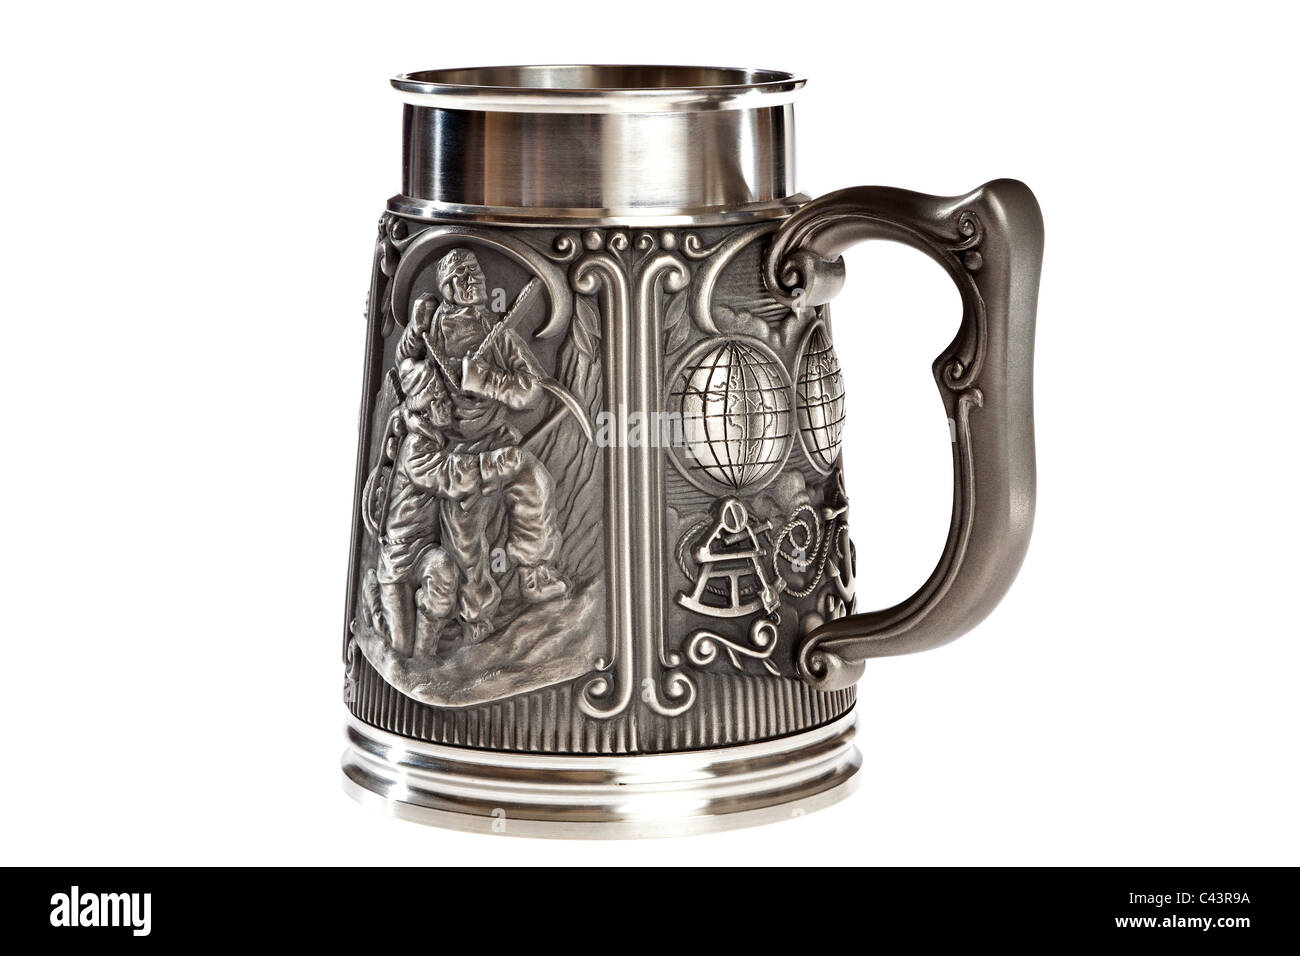 Edmund Hillary and Sherpa Tenzing Norgay portrayed Royal Geographical Society sesquicentennial pewter tankard 1830-1980 JMH4961 Stock Photo